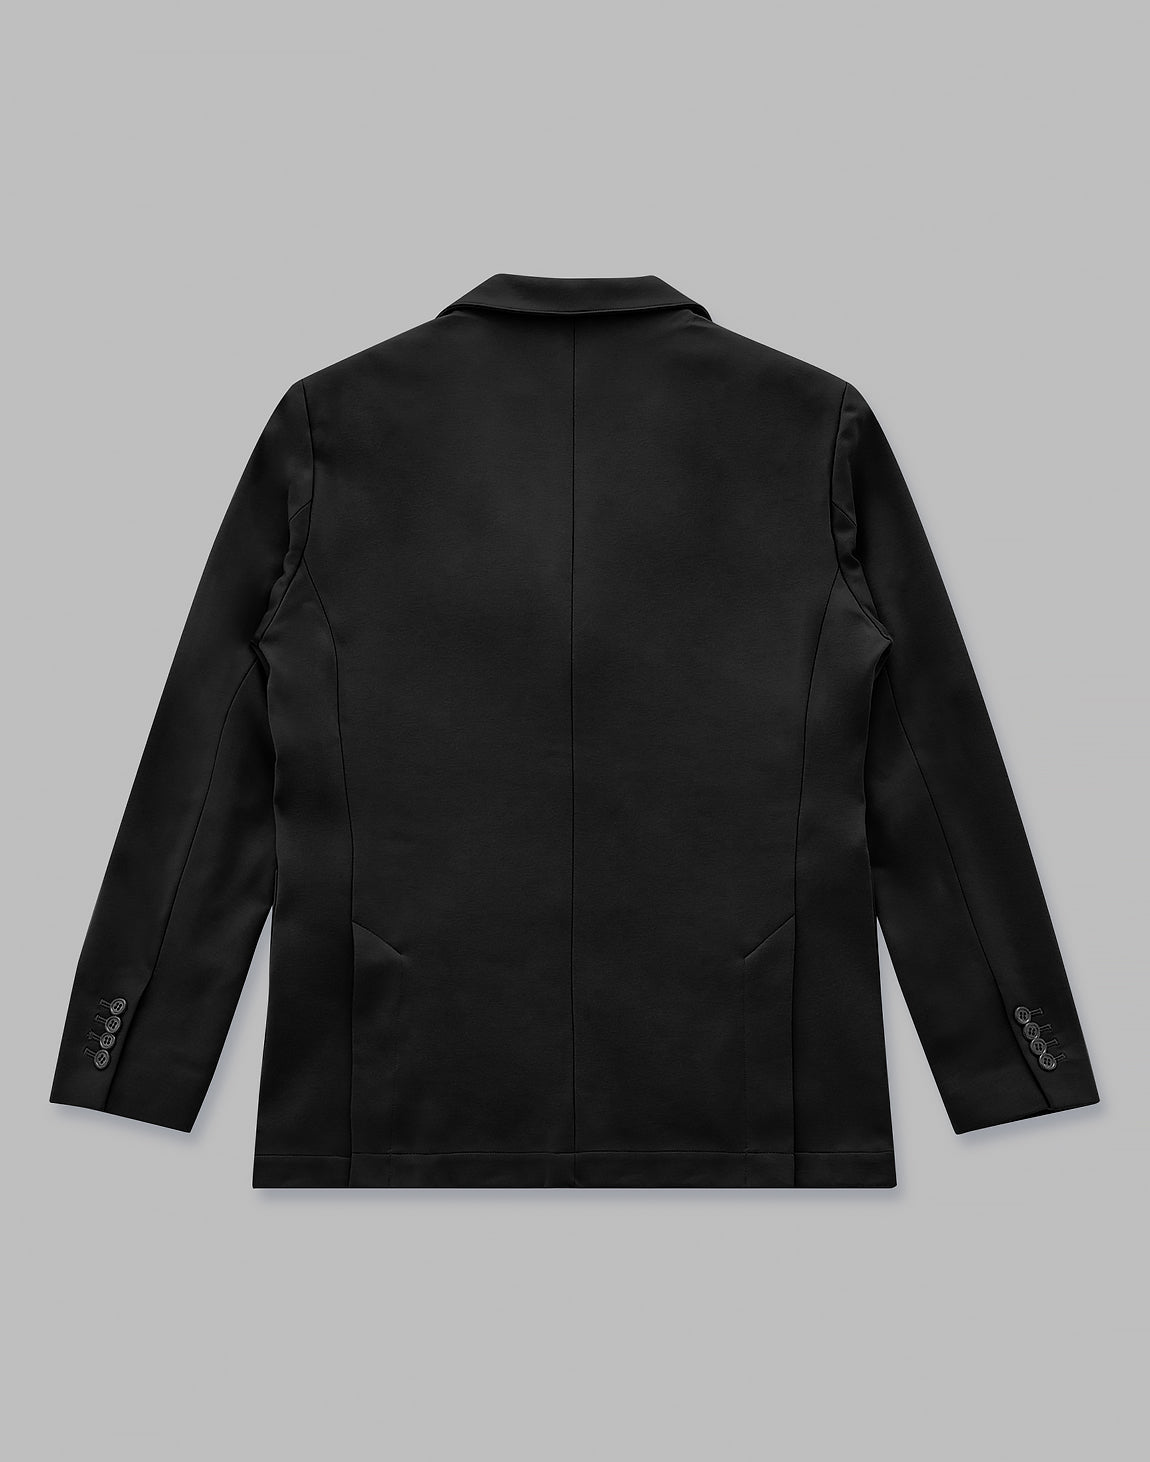 CRONOS BLACK STRETCH JACKET – クロノス CRONOS Official Store